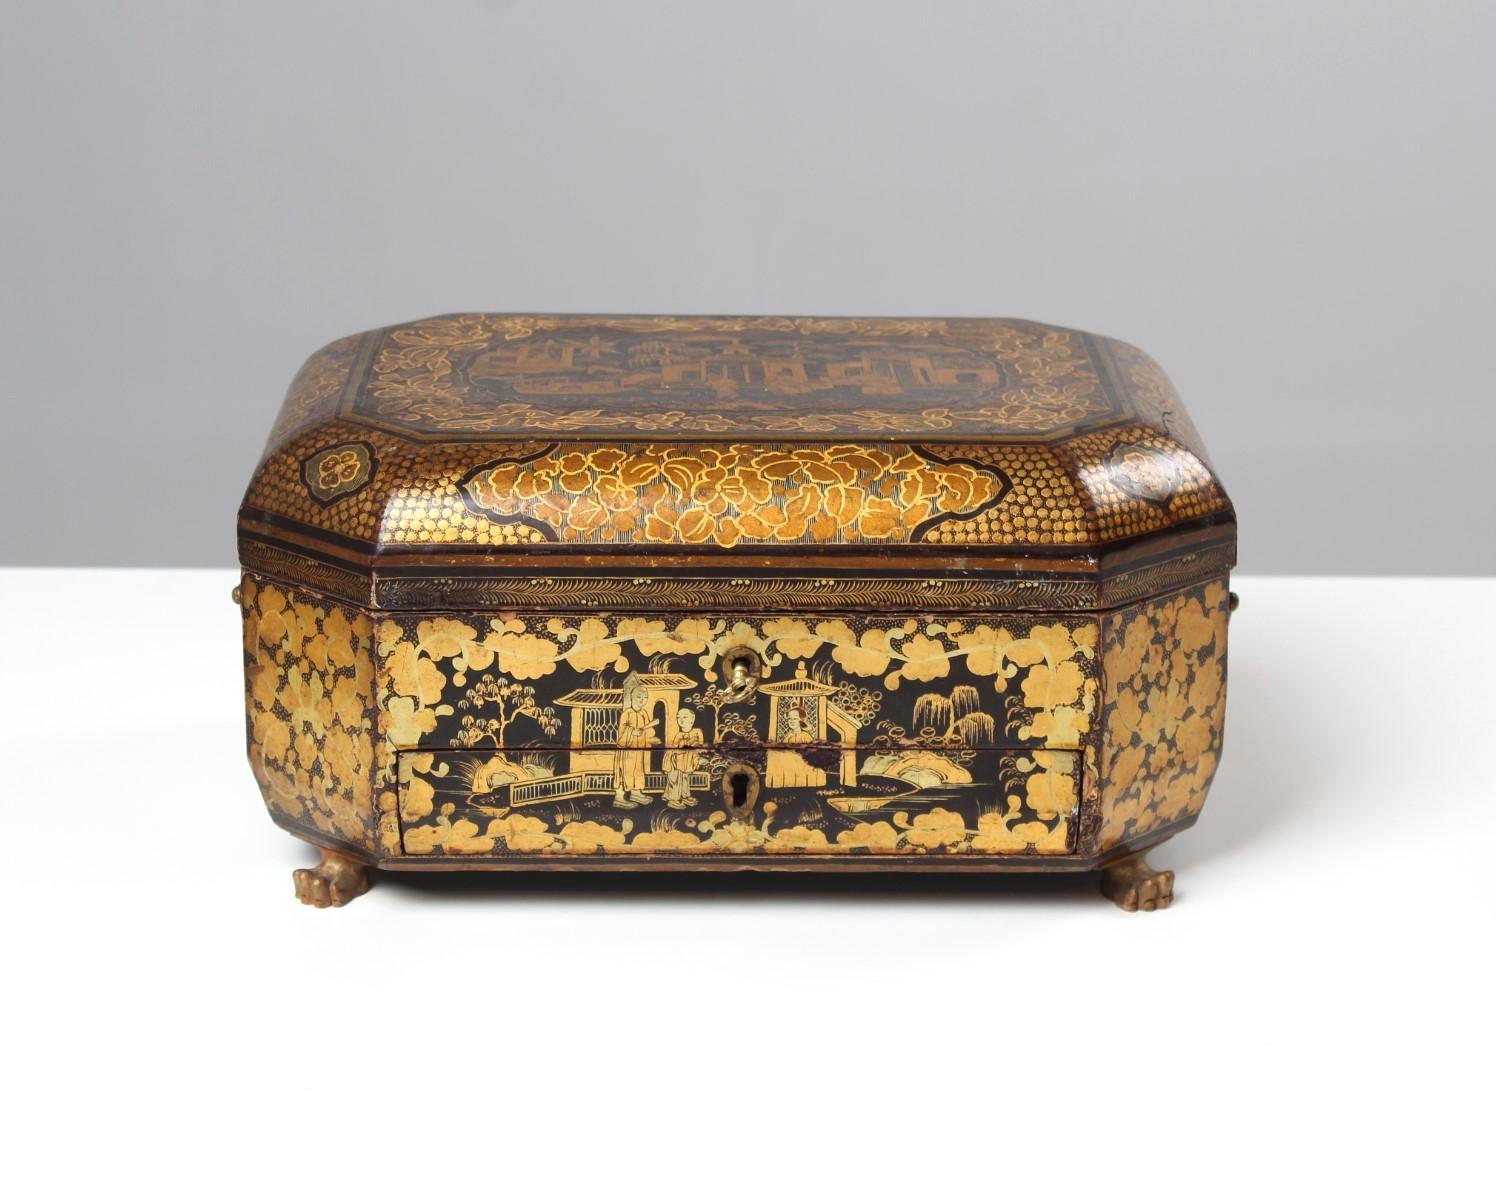 Casket with chinoiserie

Wooden jewelry box with paintings in Chinese style.
Fine gold painting depicts leaves and vines as well as figural and architectural motifs.
There is a drawer that opens from the outside and various compartments with